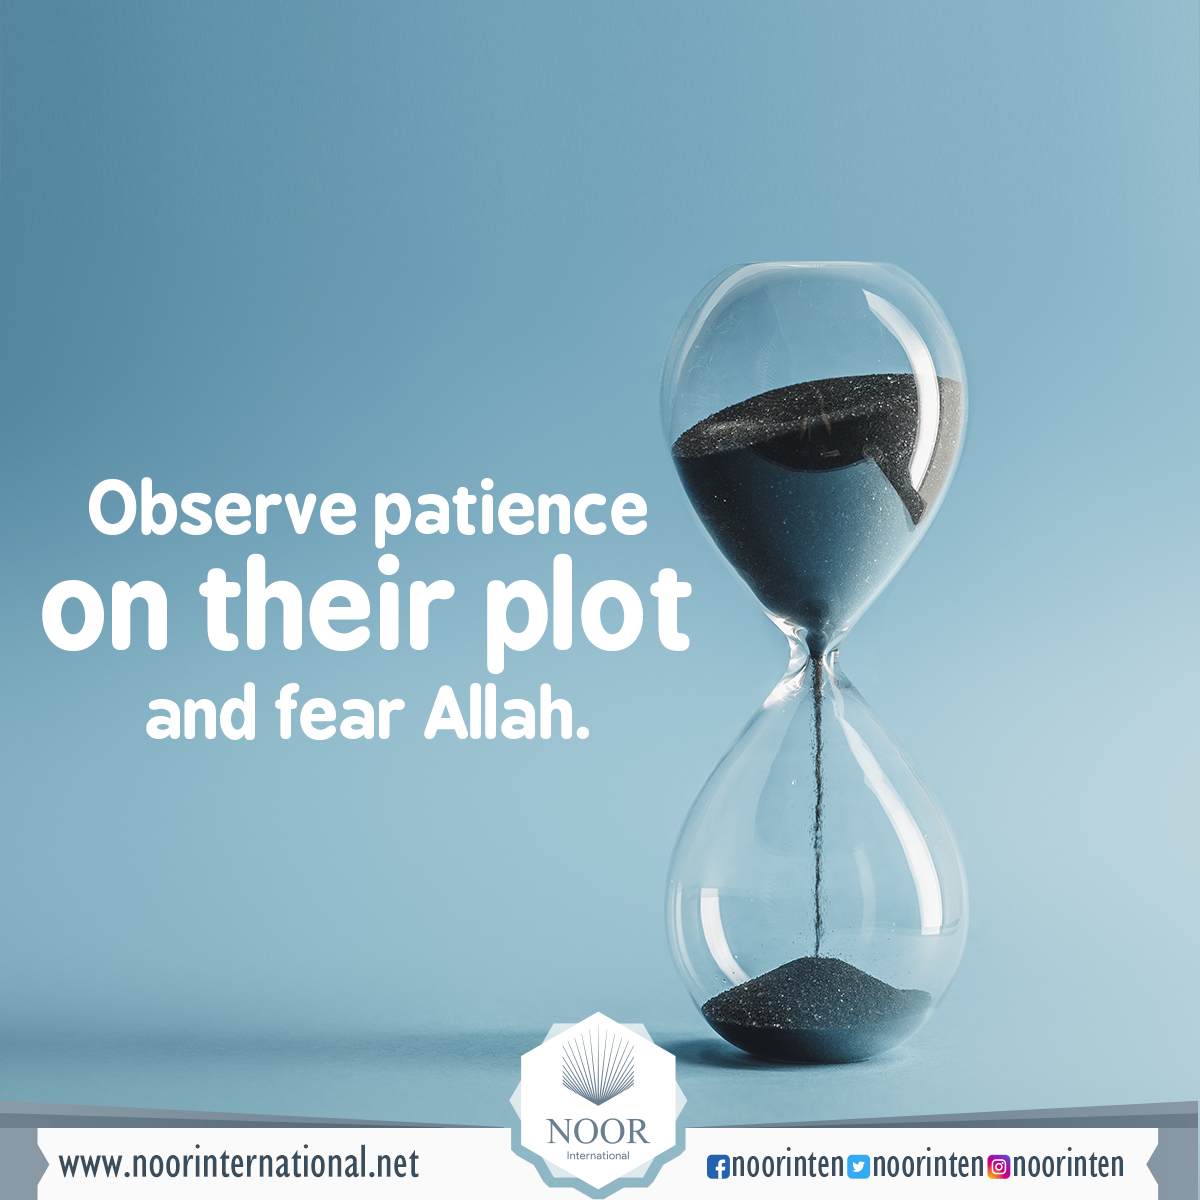 Observe patience on their plot and fear Allah.